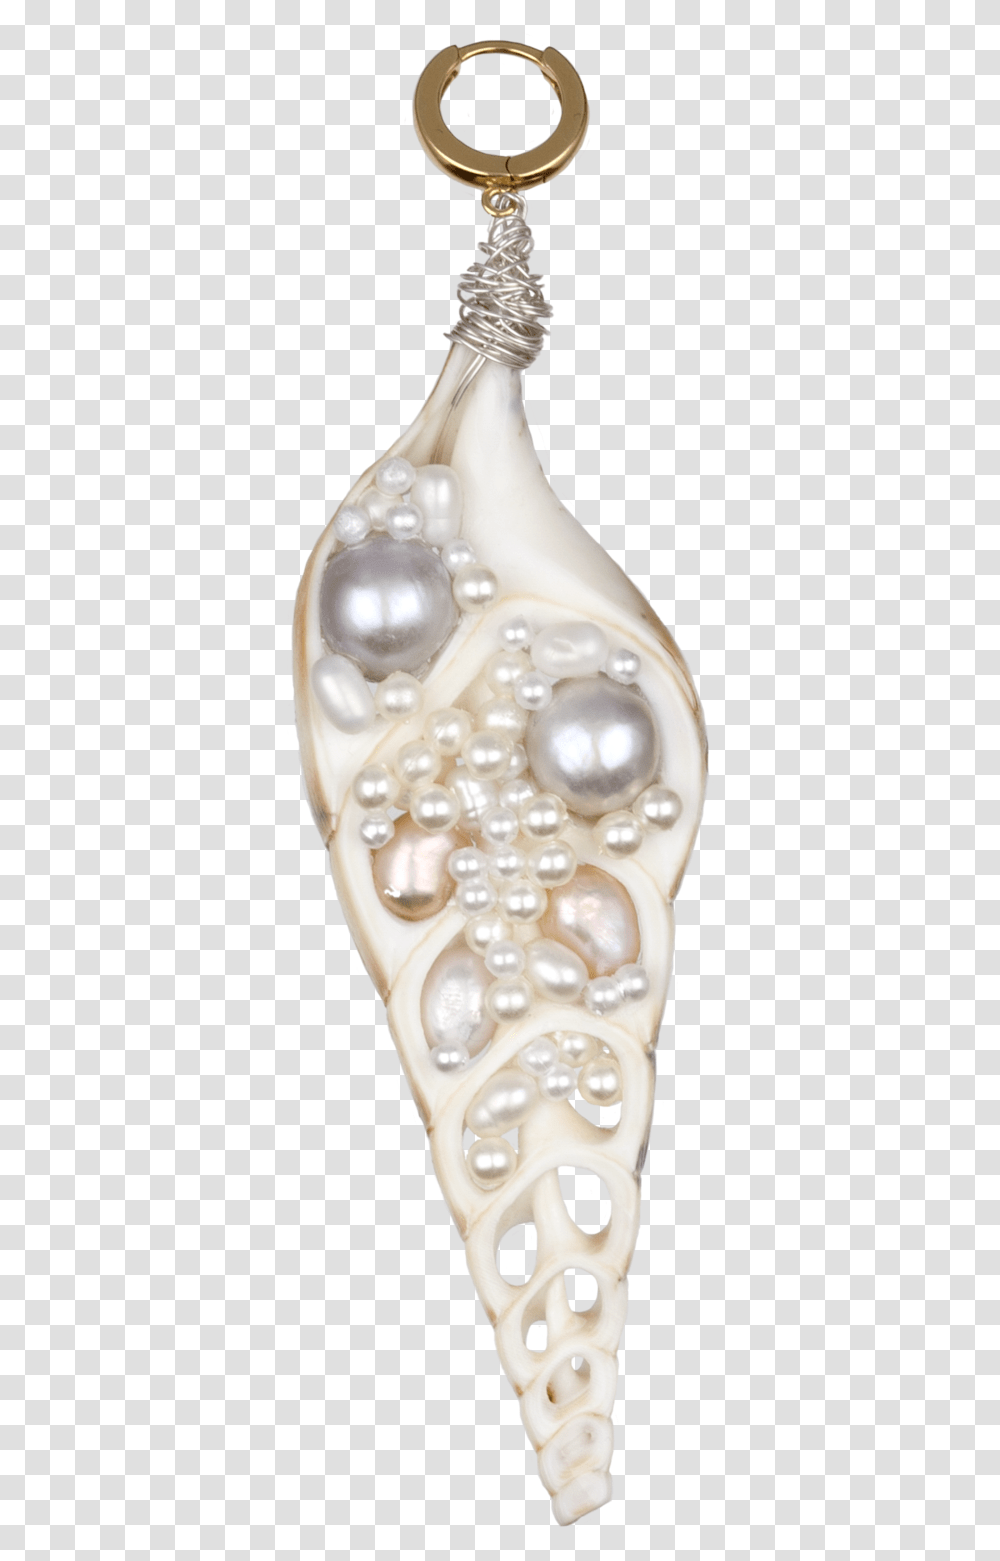 Spice Up Your Life Shell Pearls Earring Wald Berlin Pearl, Jewelry, Accessories, Accessory, Gemstone Transparent Png